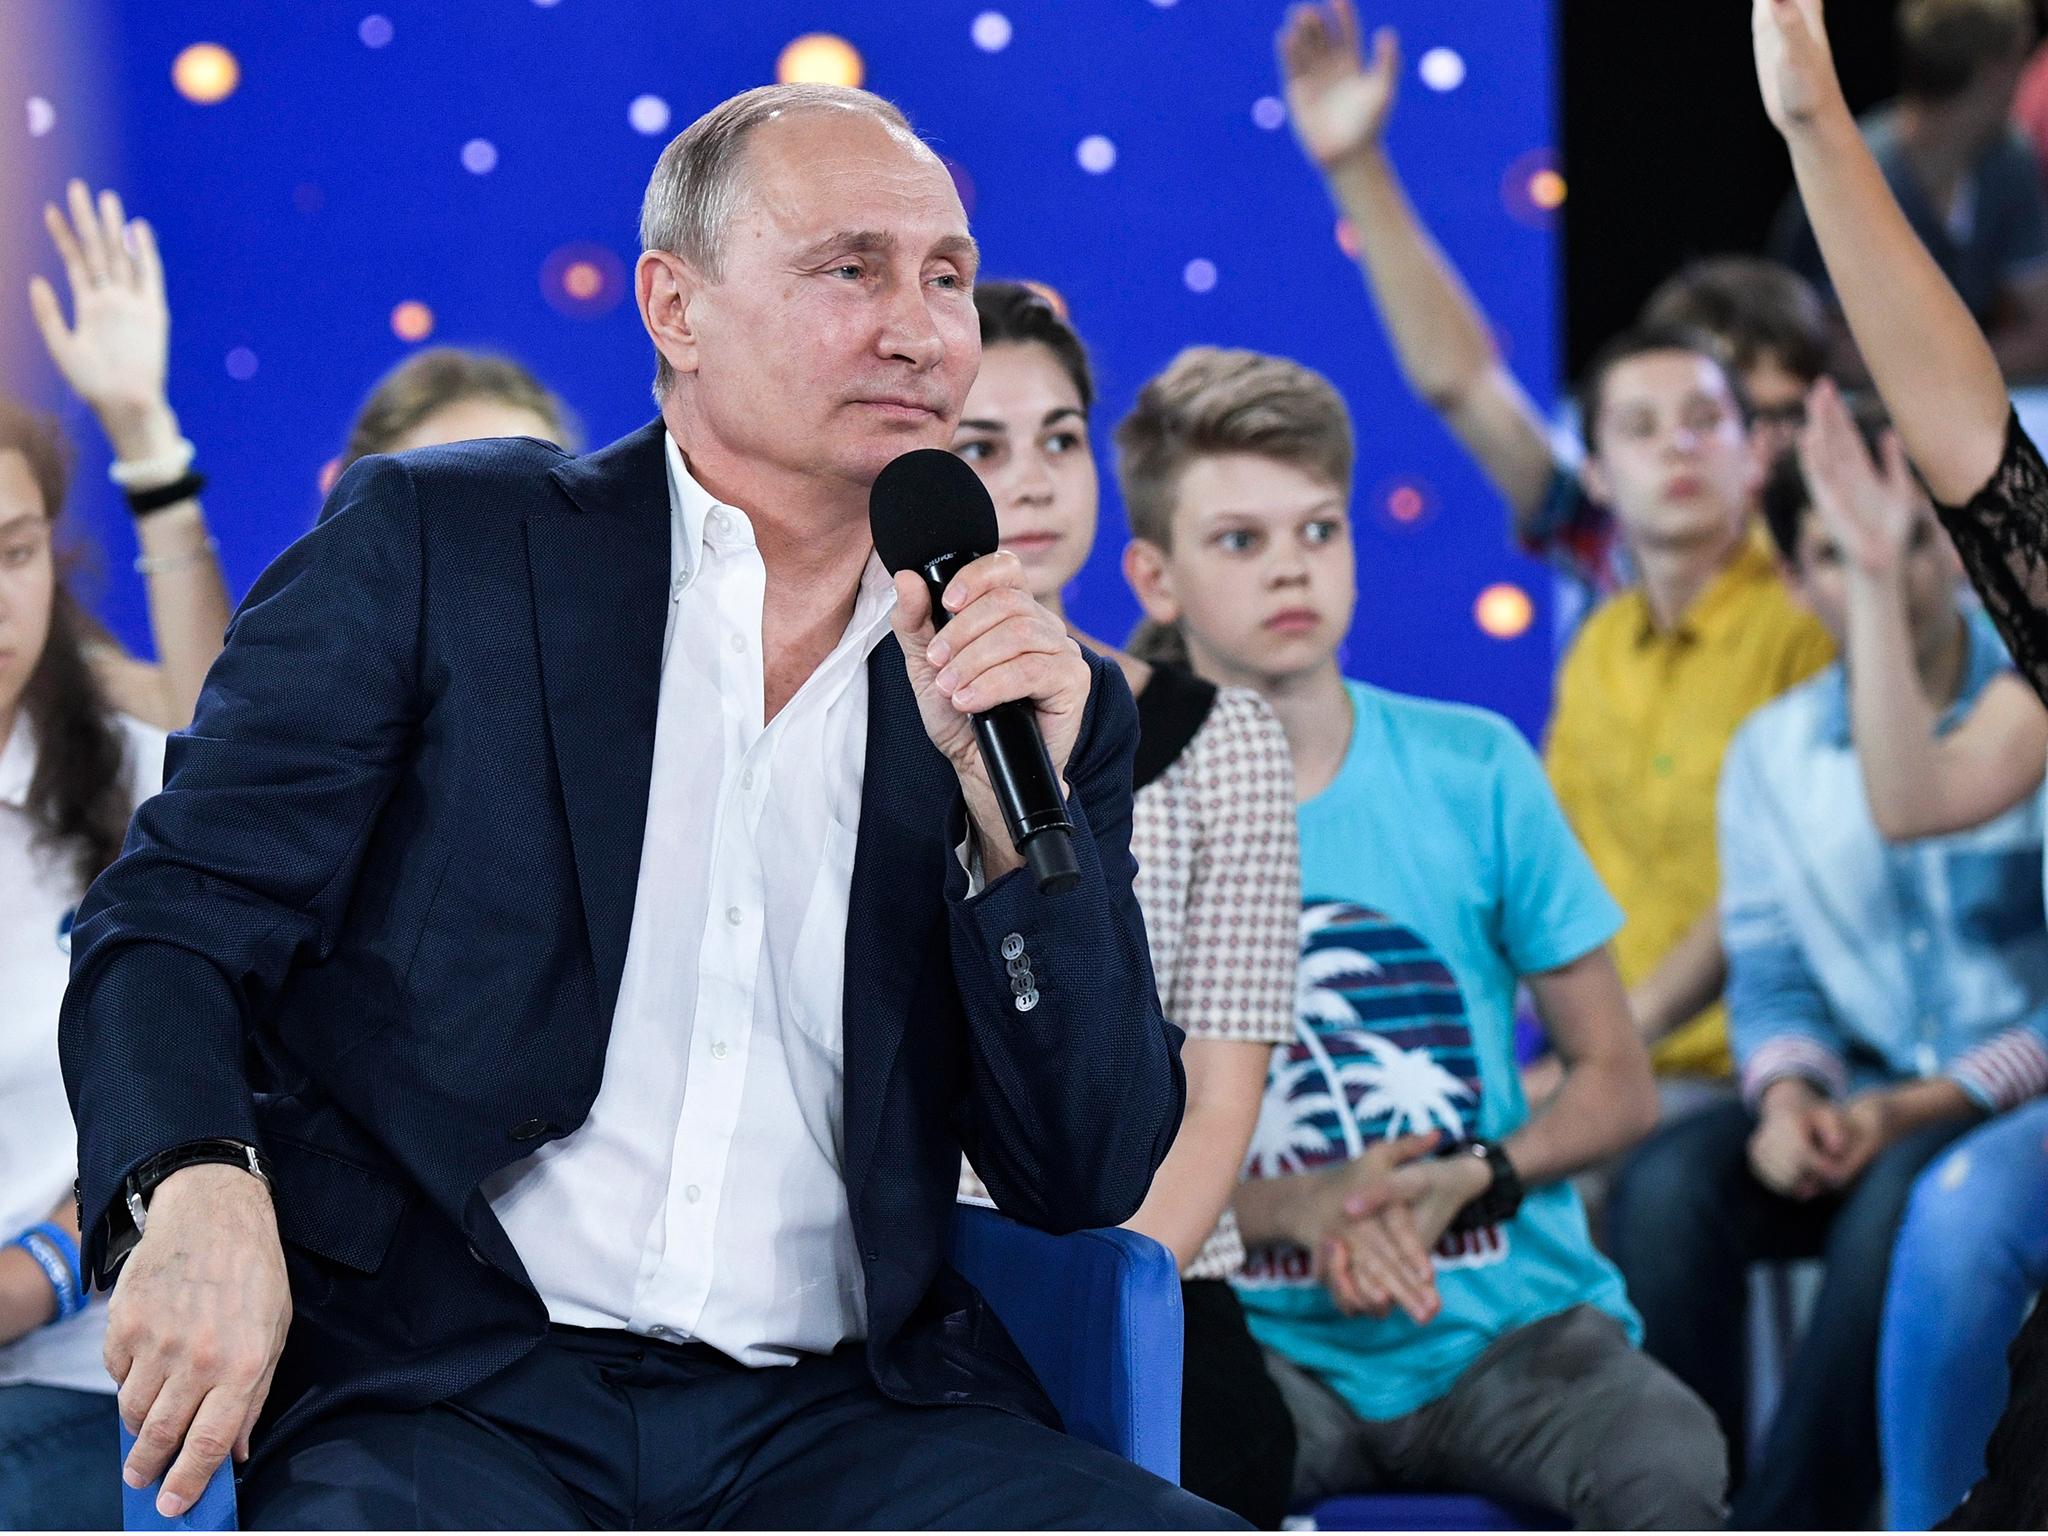 Vladimir Putin was speaking during a three-hour question and answer session with Russian children at a school in the Black Sea city of Sochi